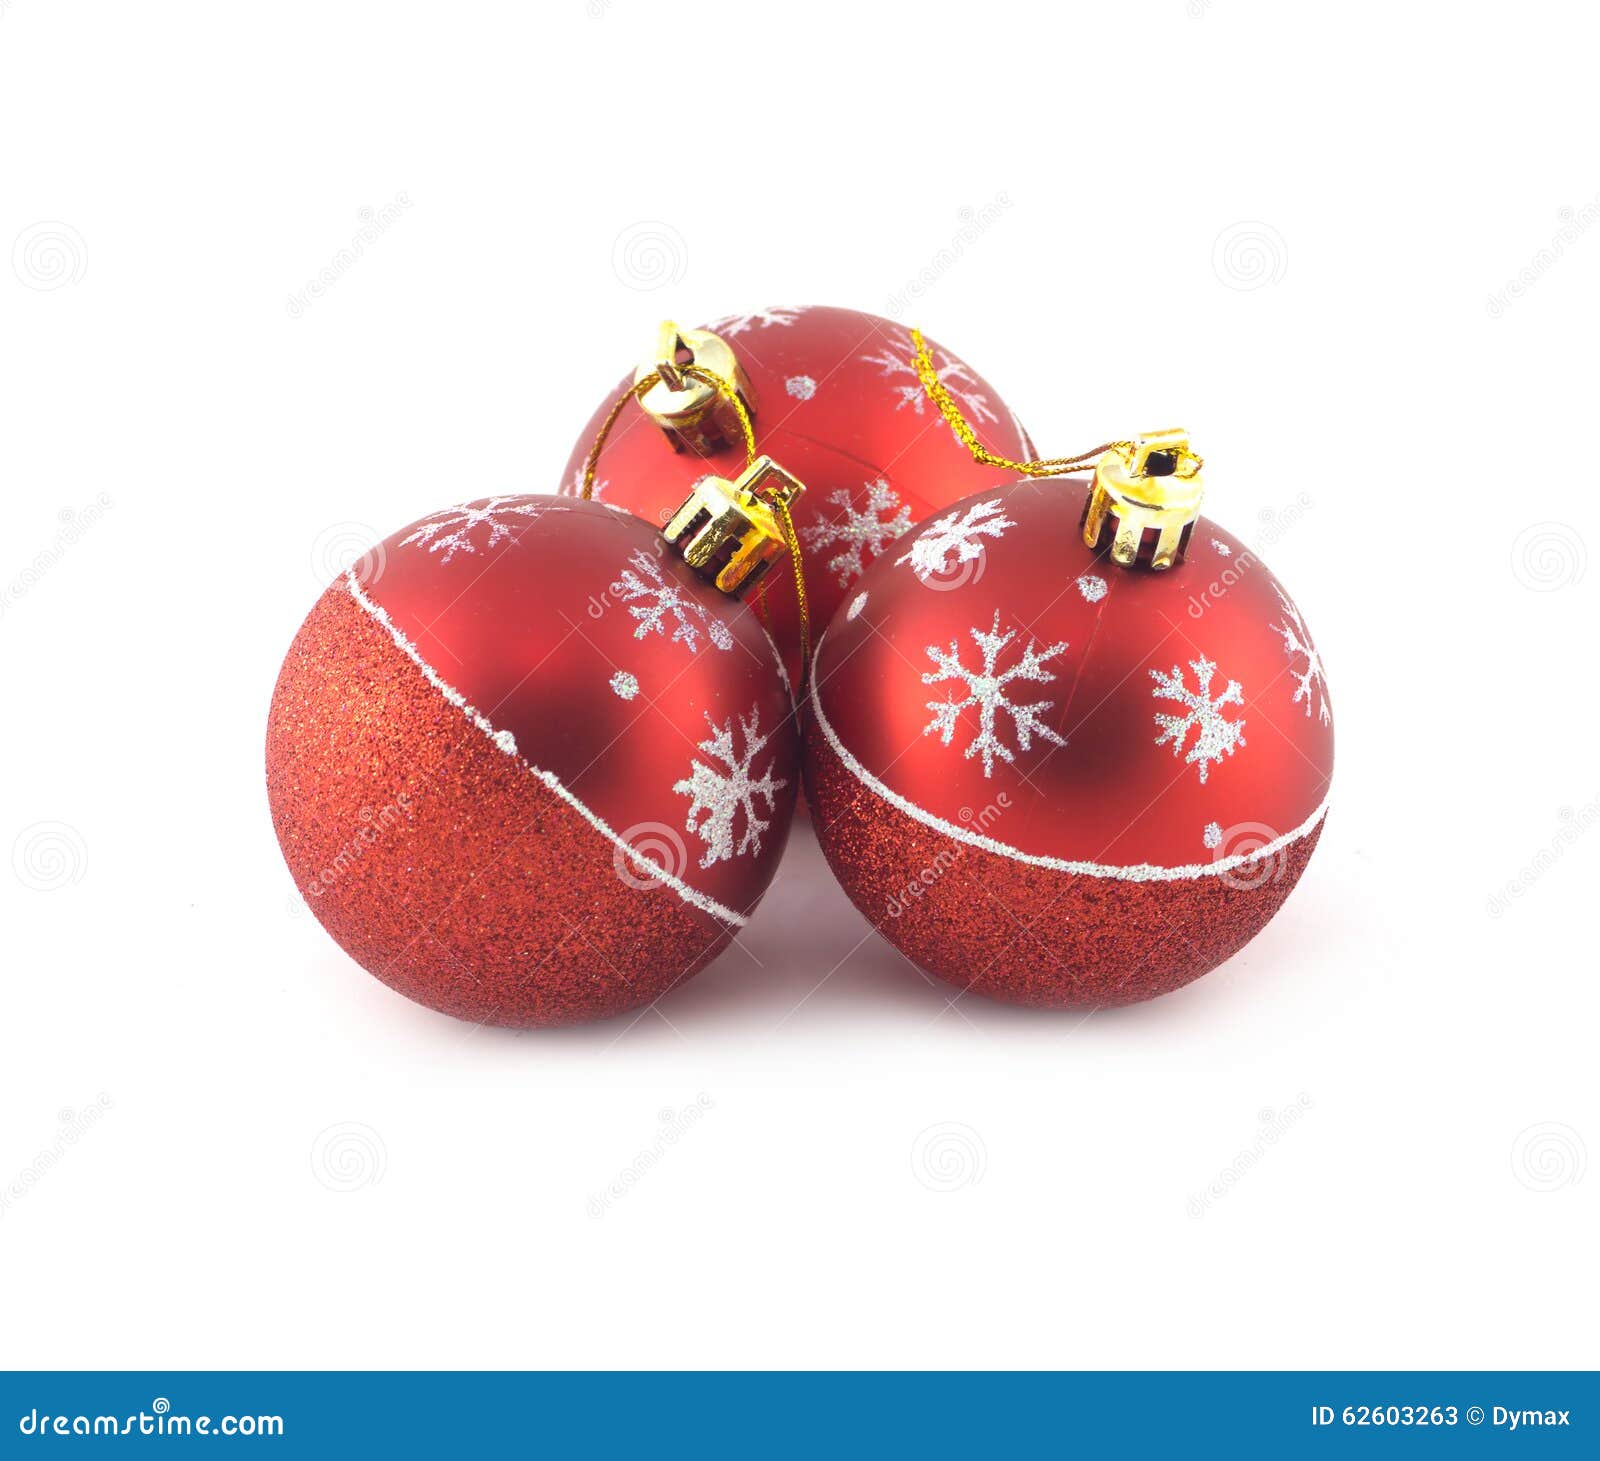 Red Christmas Balls Isolated on White Stock Image - Image of object ...